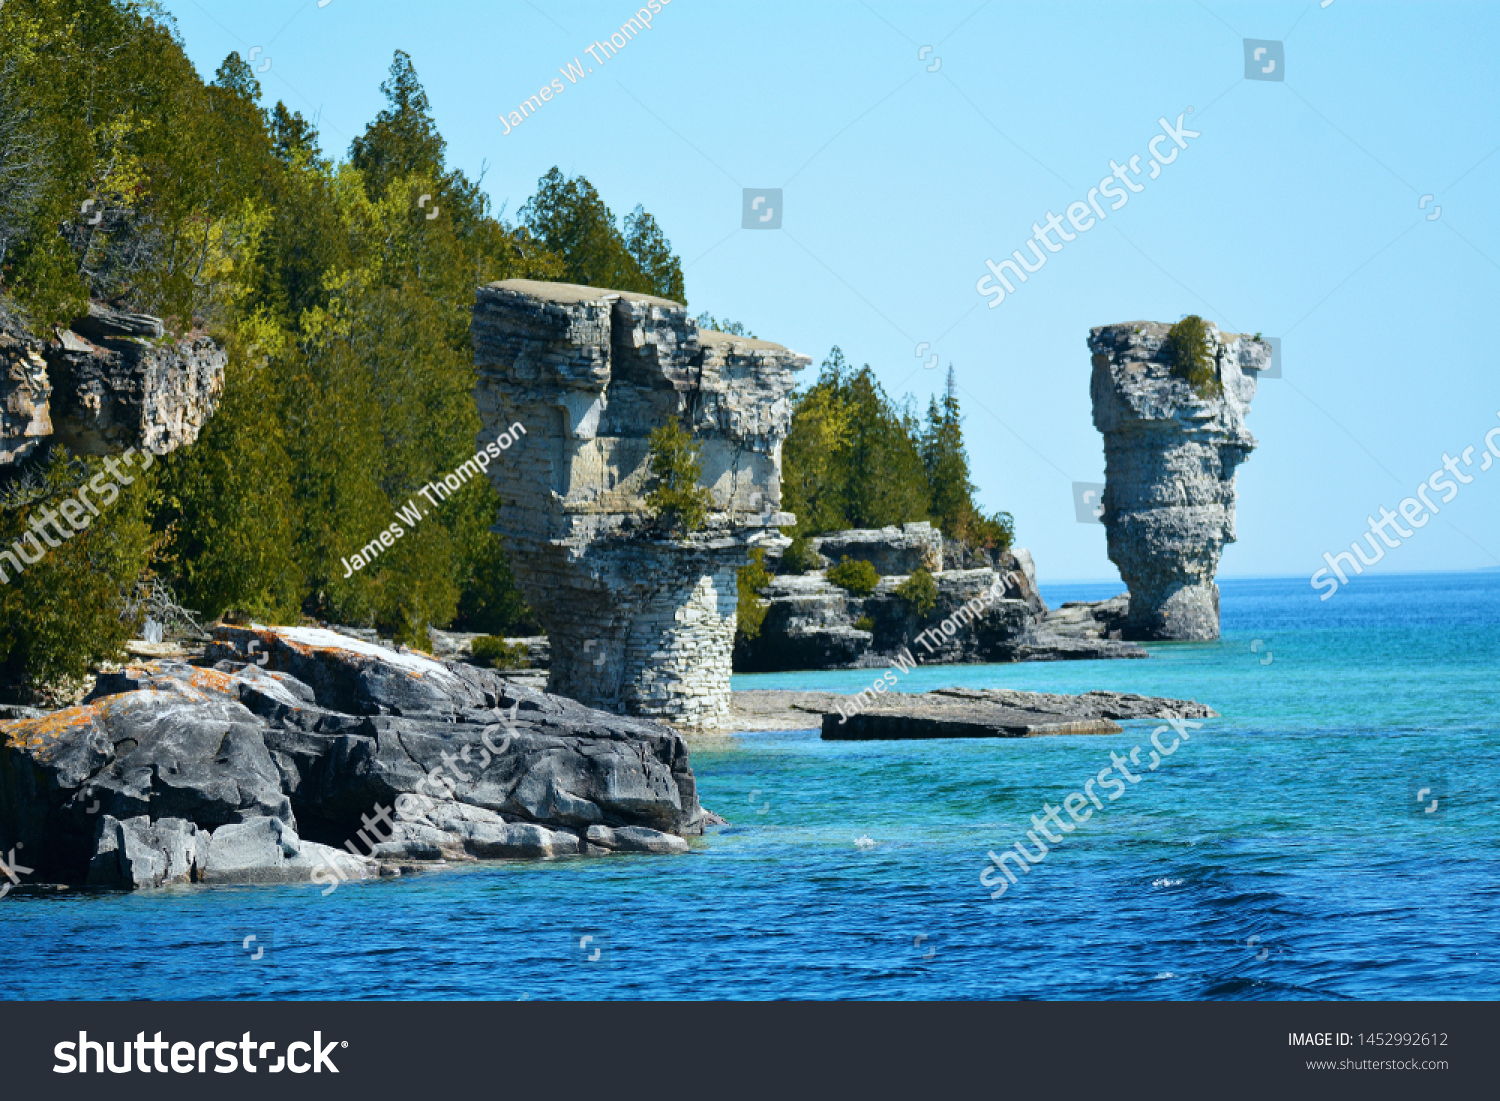 One of the two "flowerpot" rock formations located on Flowerpot Island, just north of Bruce Peninsula in Lake Huron, Ontario, Canada. #1452992612